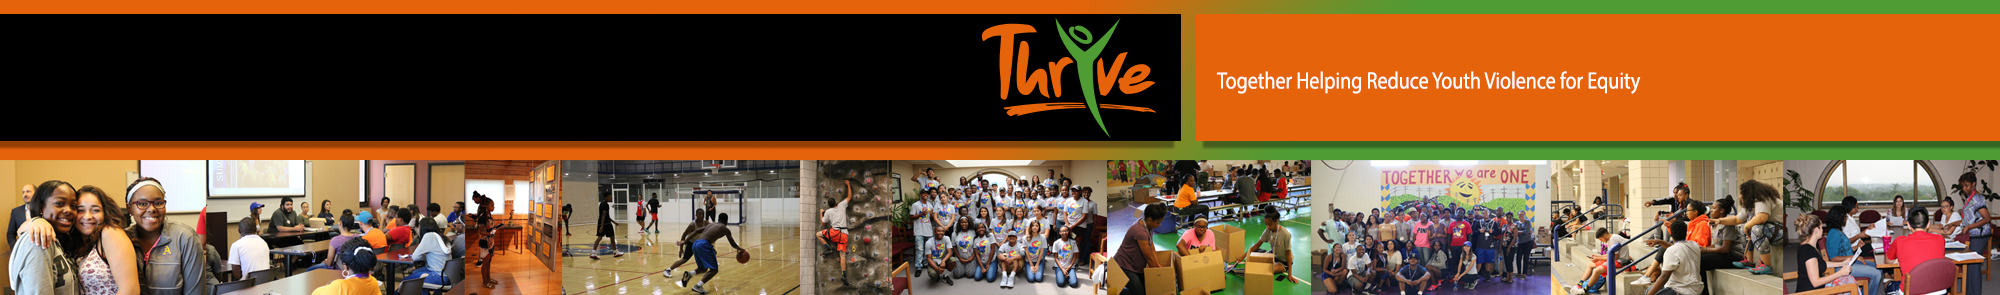 ThrYve logo and banner image featuring a collage with photos of youth in the organization.